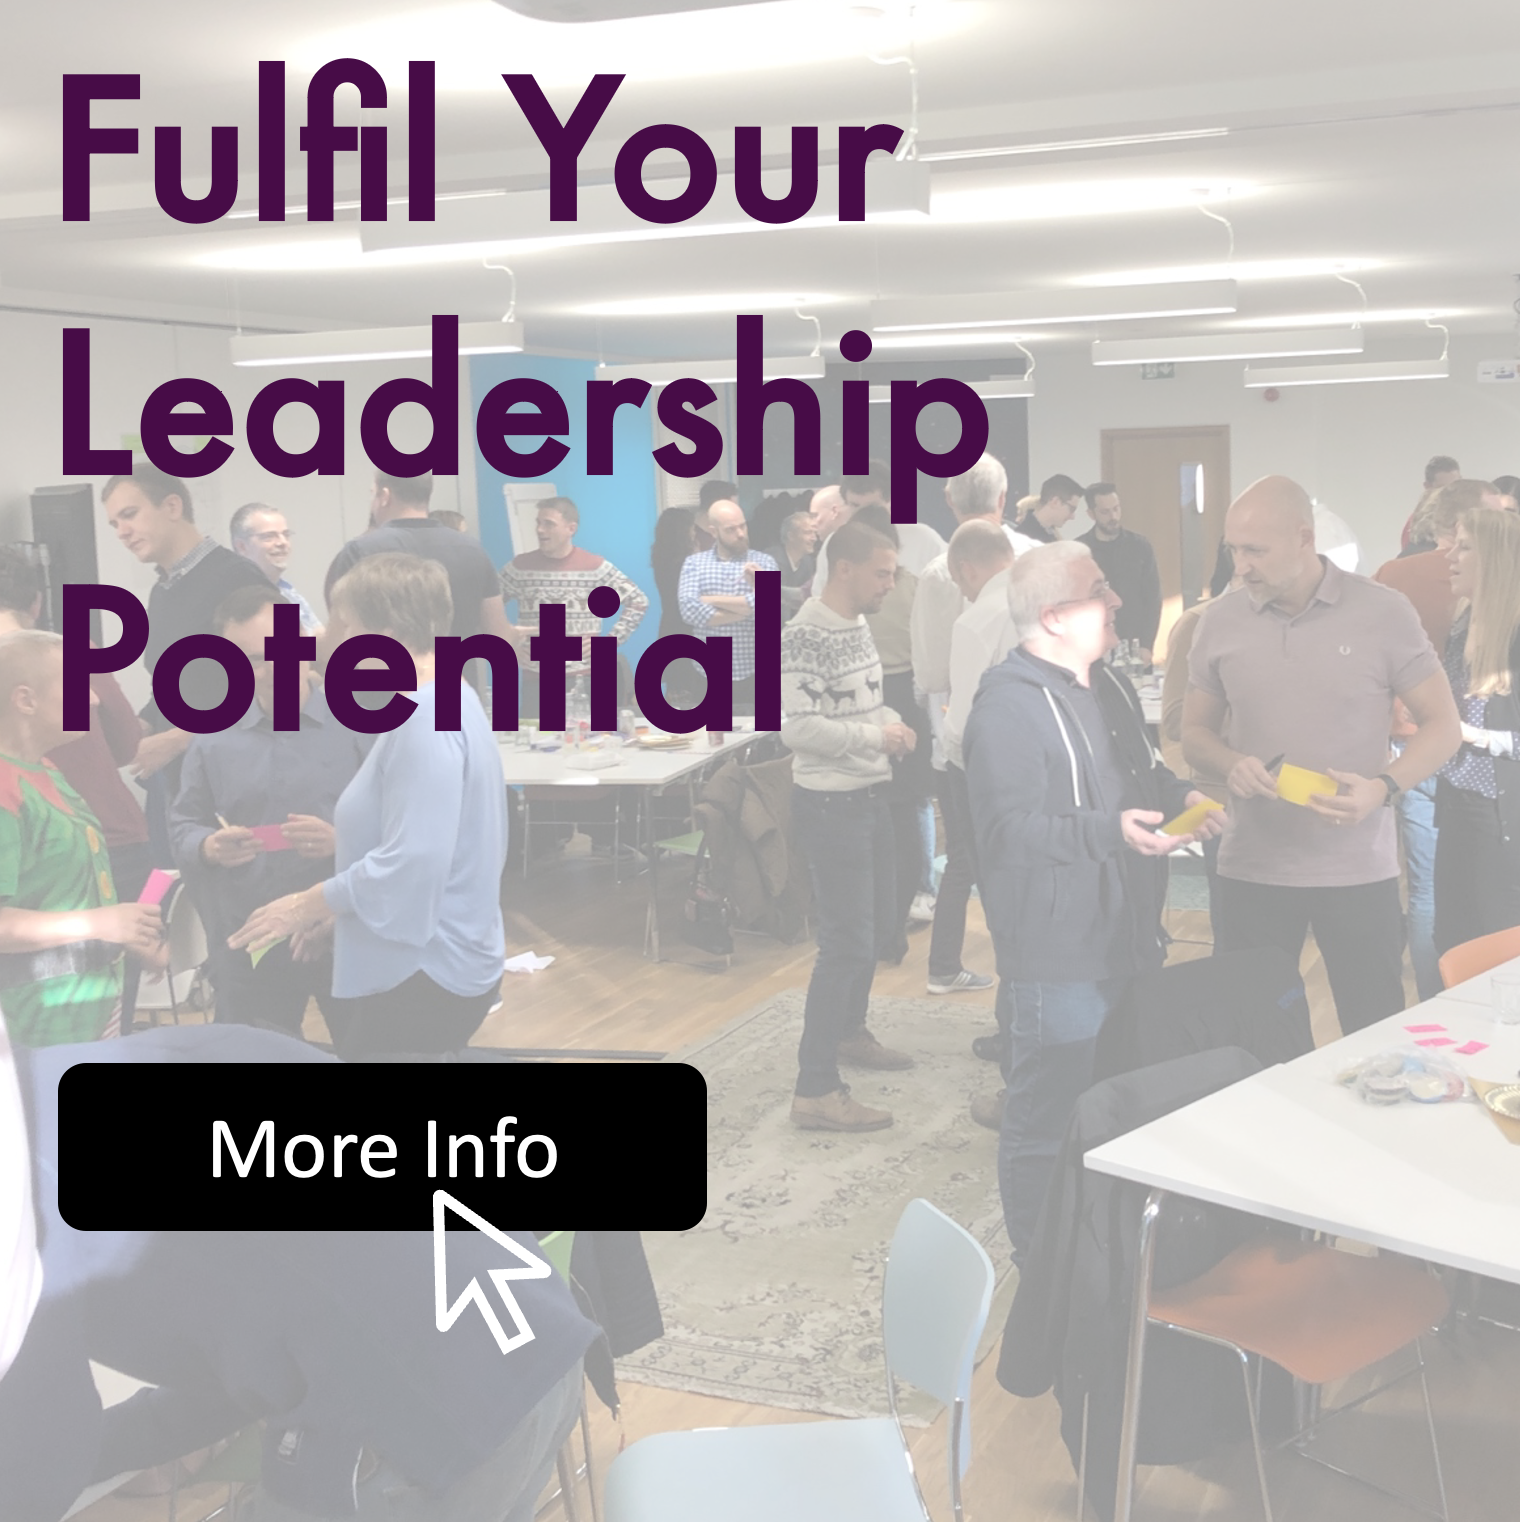 Fulfil your Leadership Potential with our course